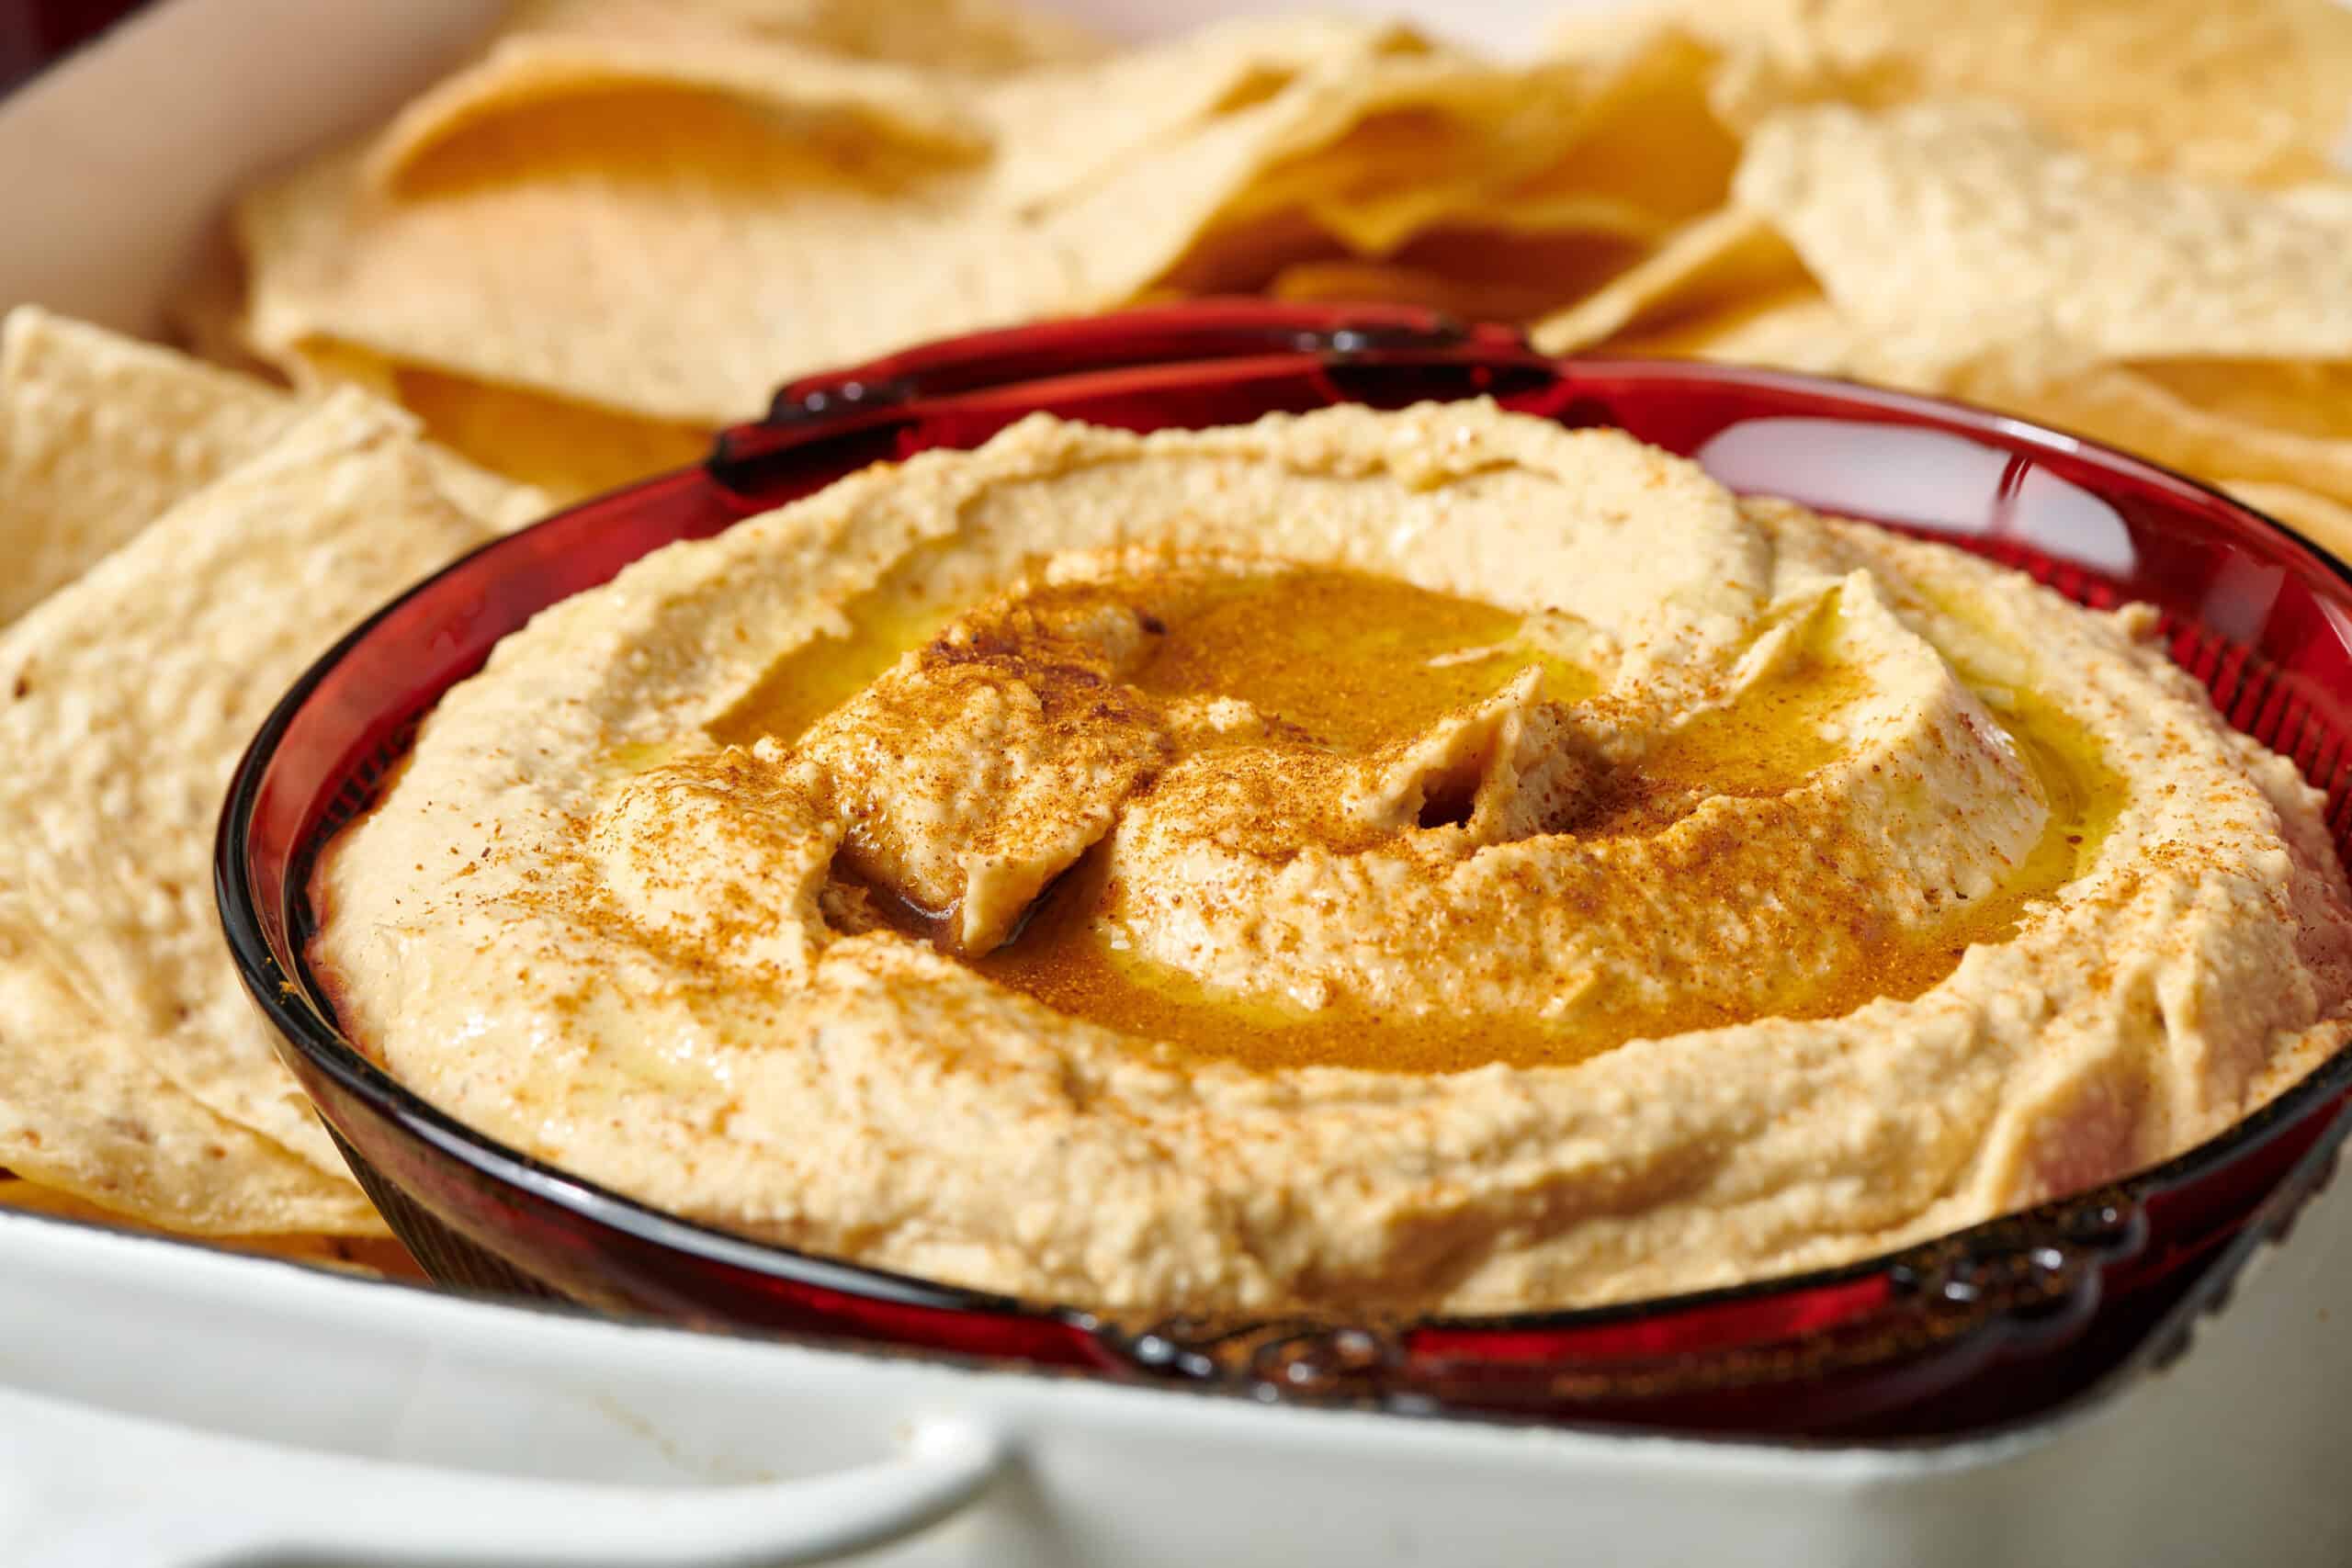 Bowl of Hummus topped with olive oil and spices.